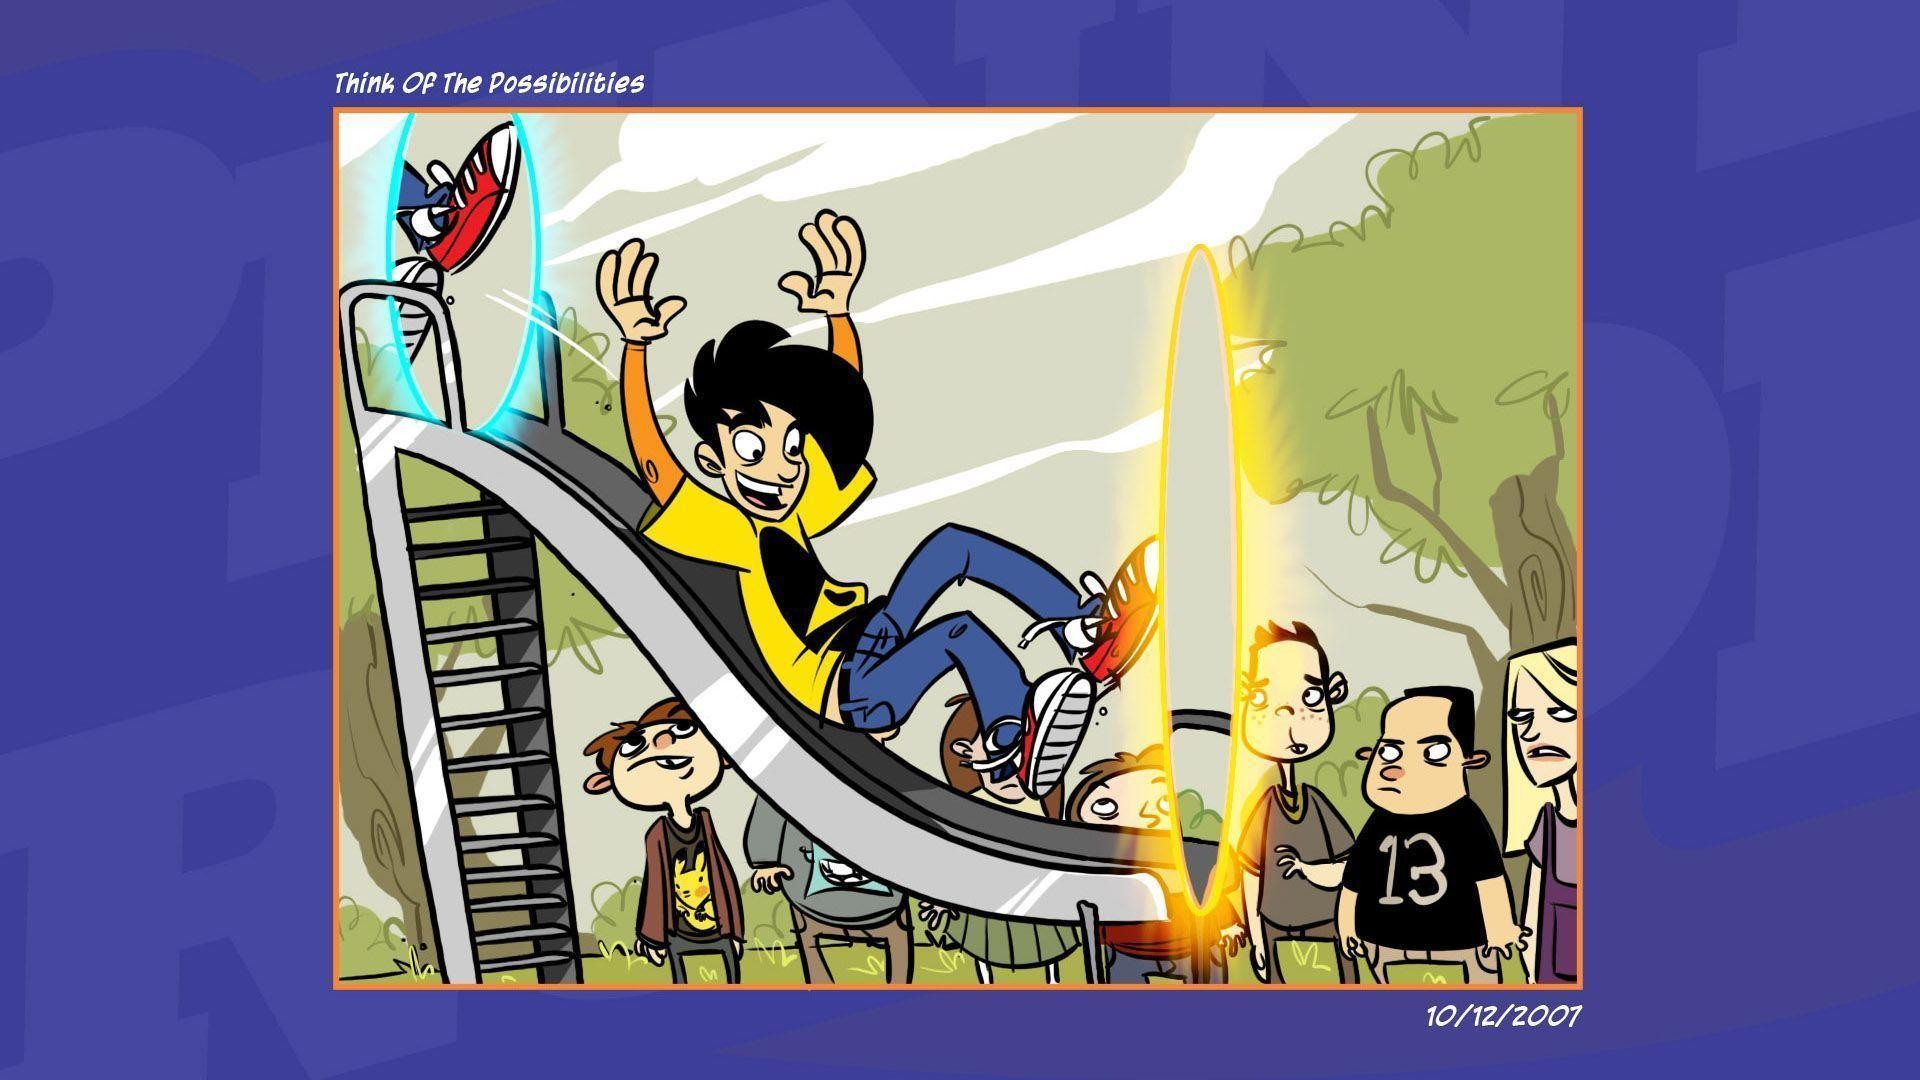 1920x1080 Penny Arcade Wallpaper 143695 High Definition Wallpapers | Suwall.